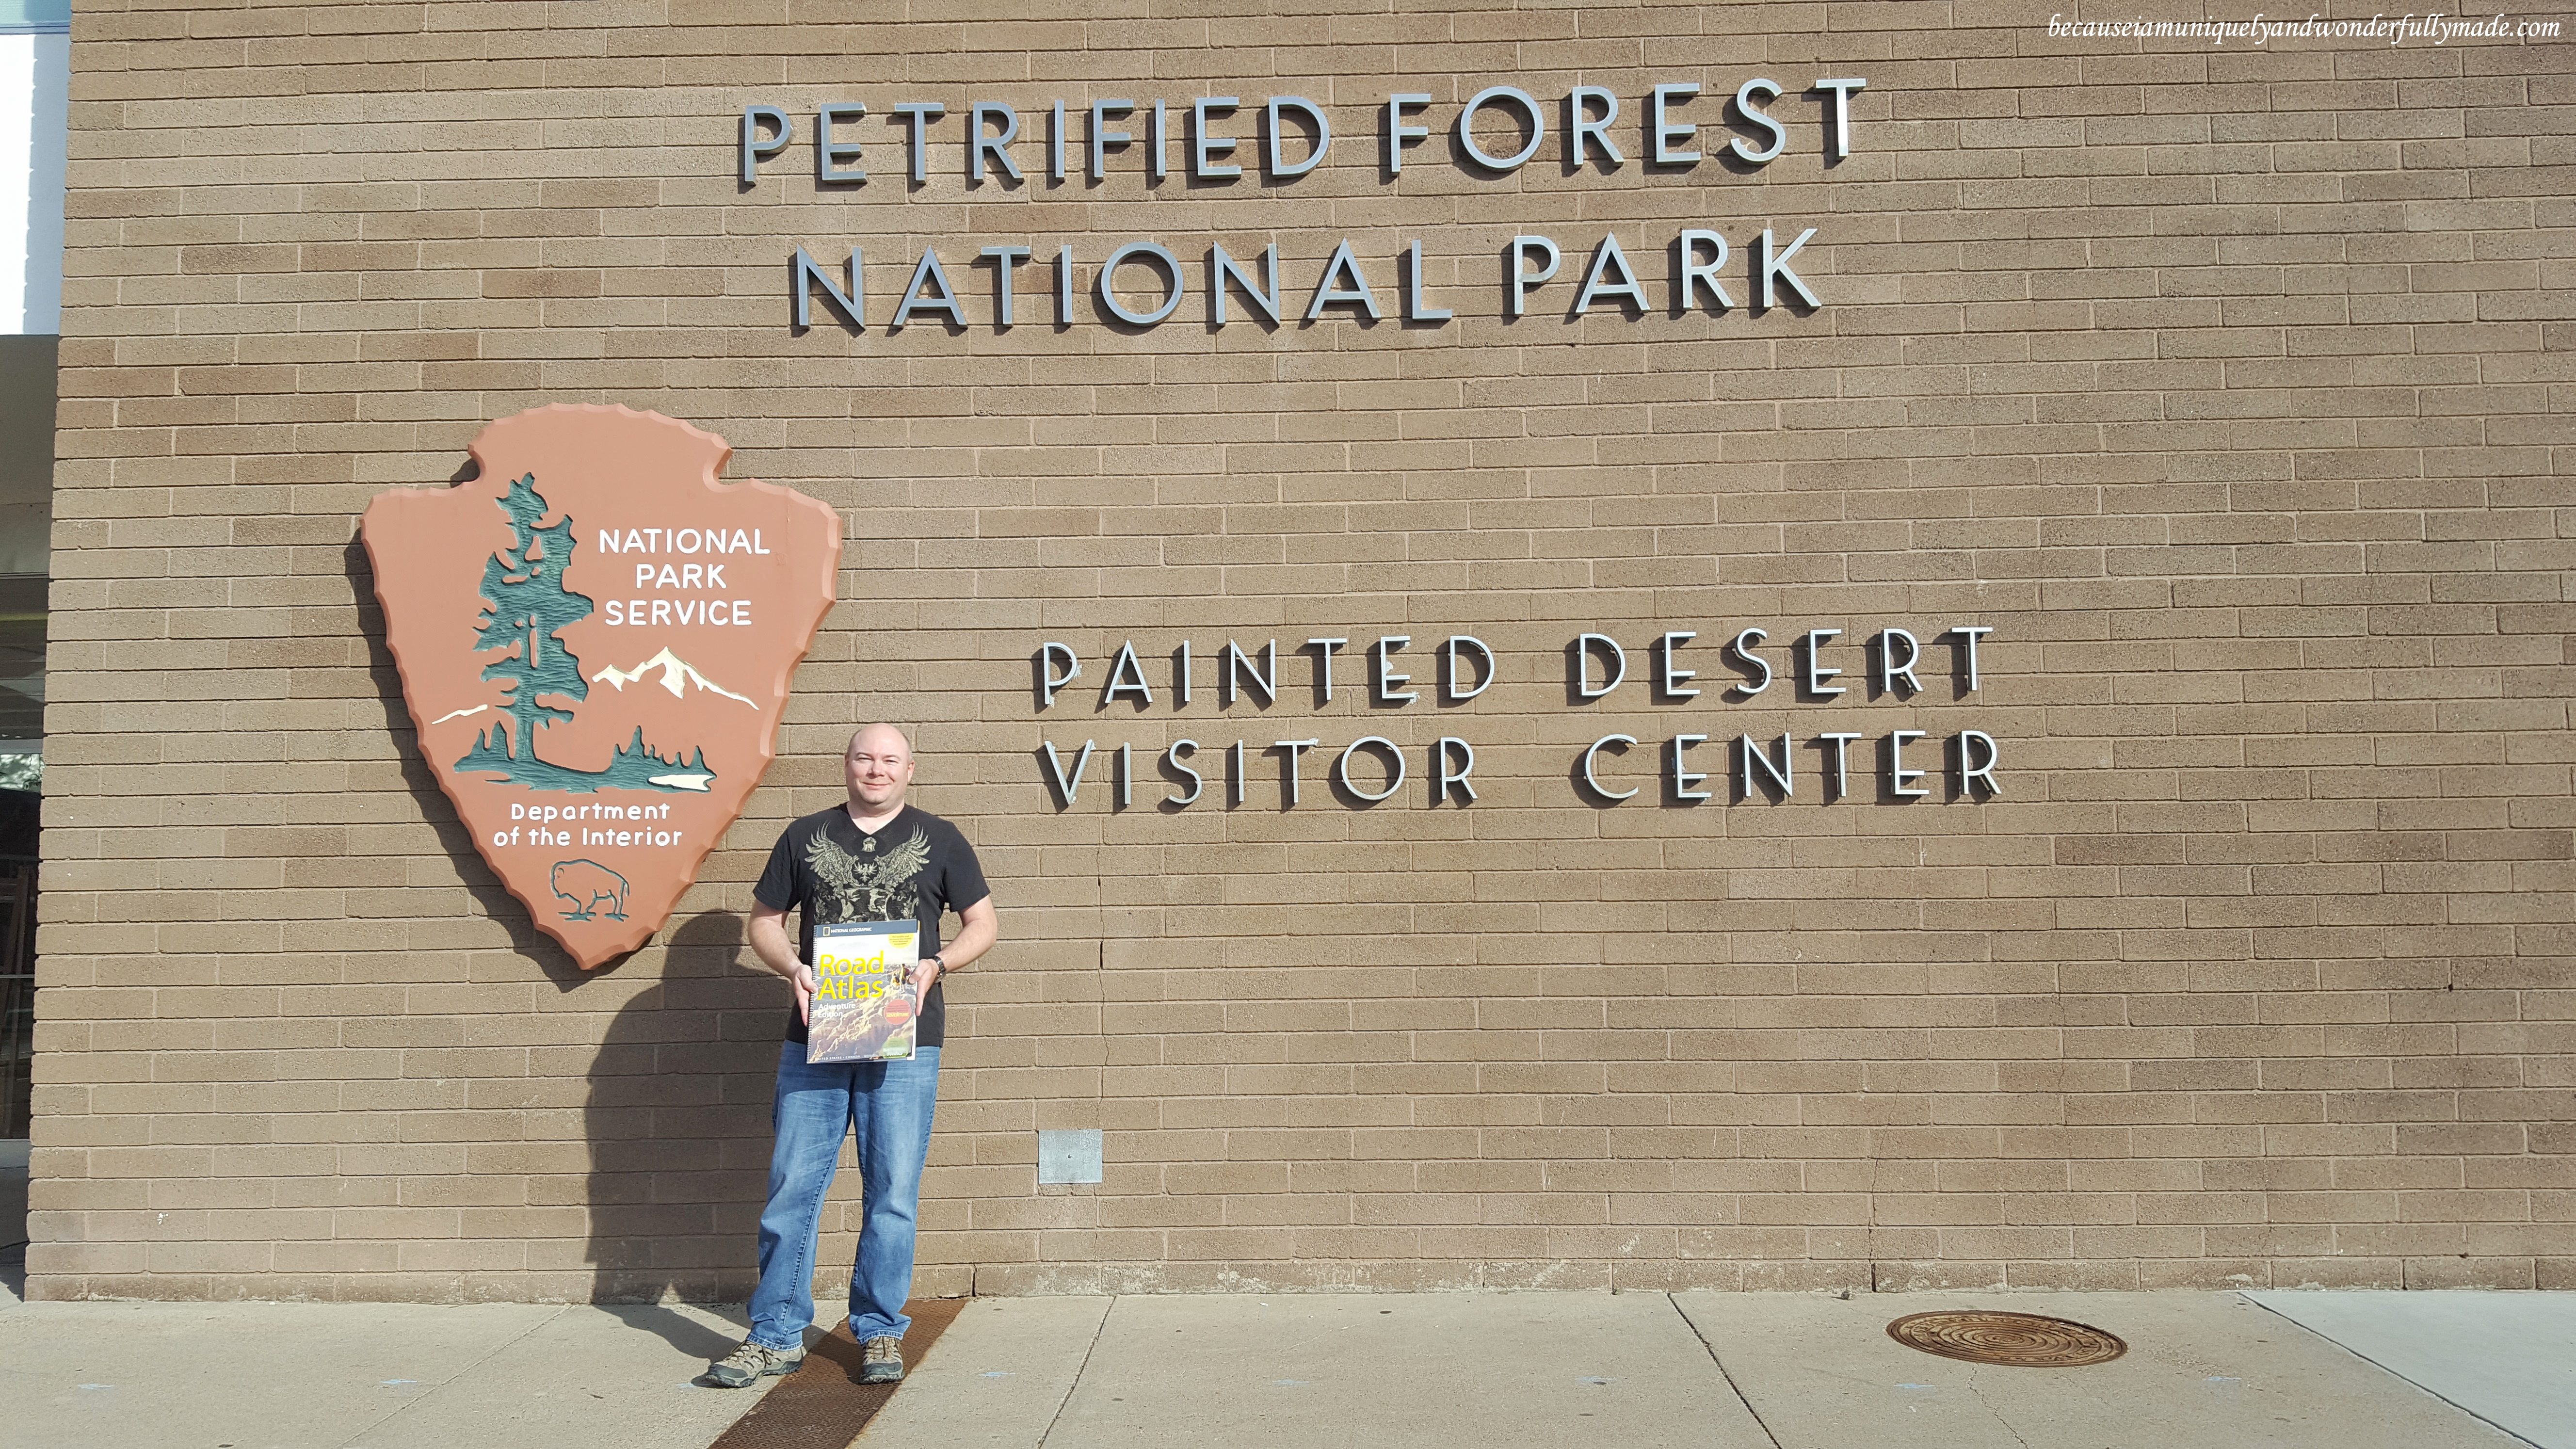 Painted Desert Visitor Center at Petrified Forest National Park.